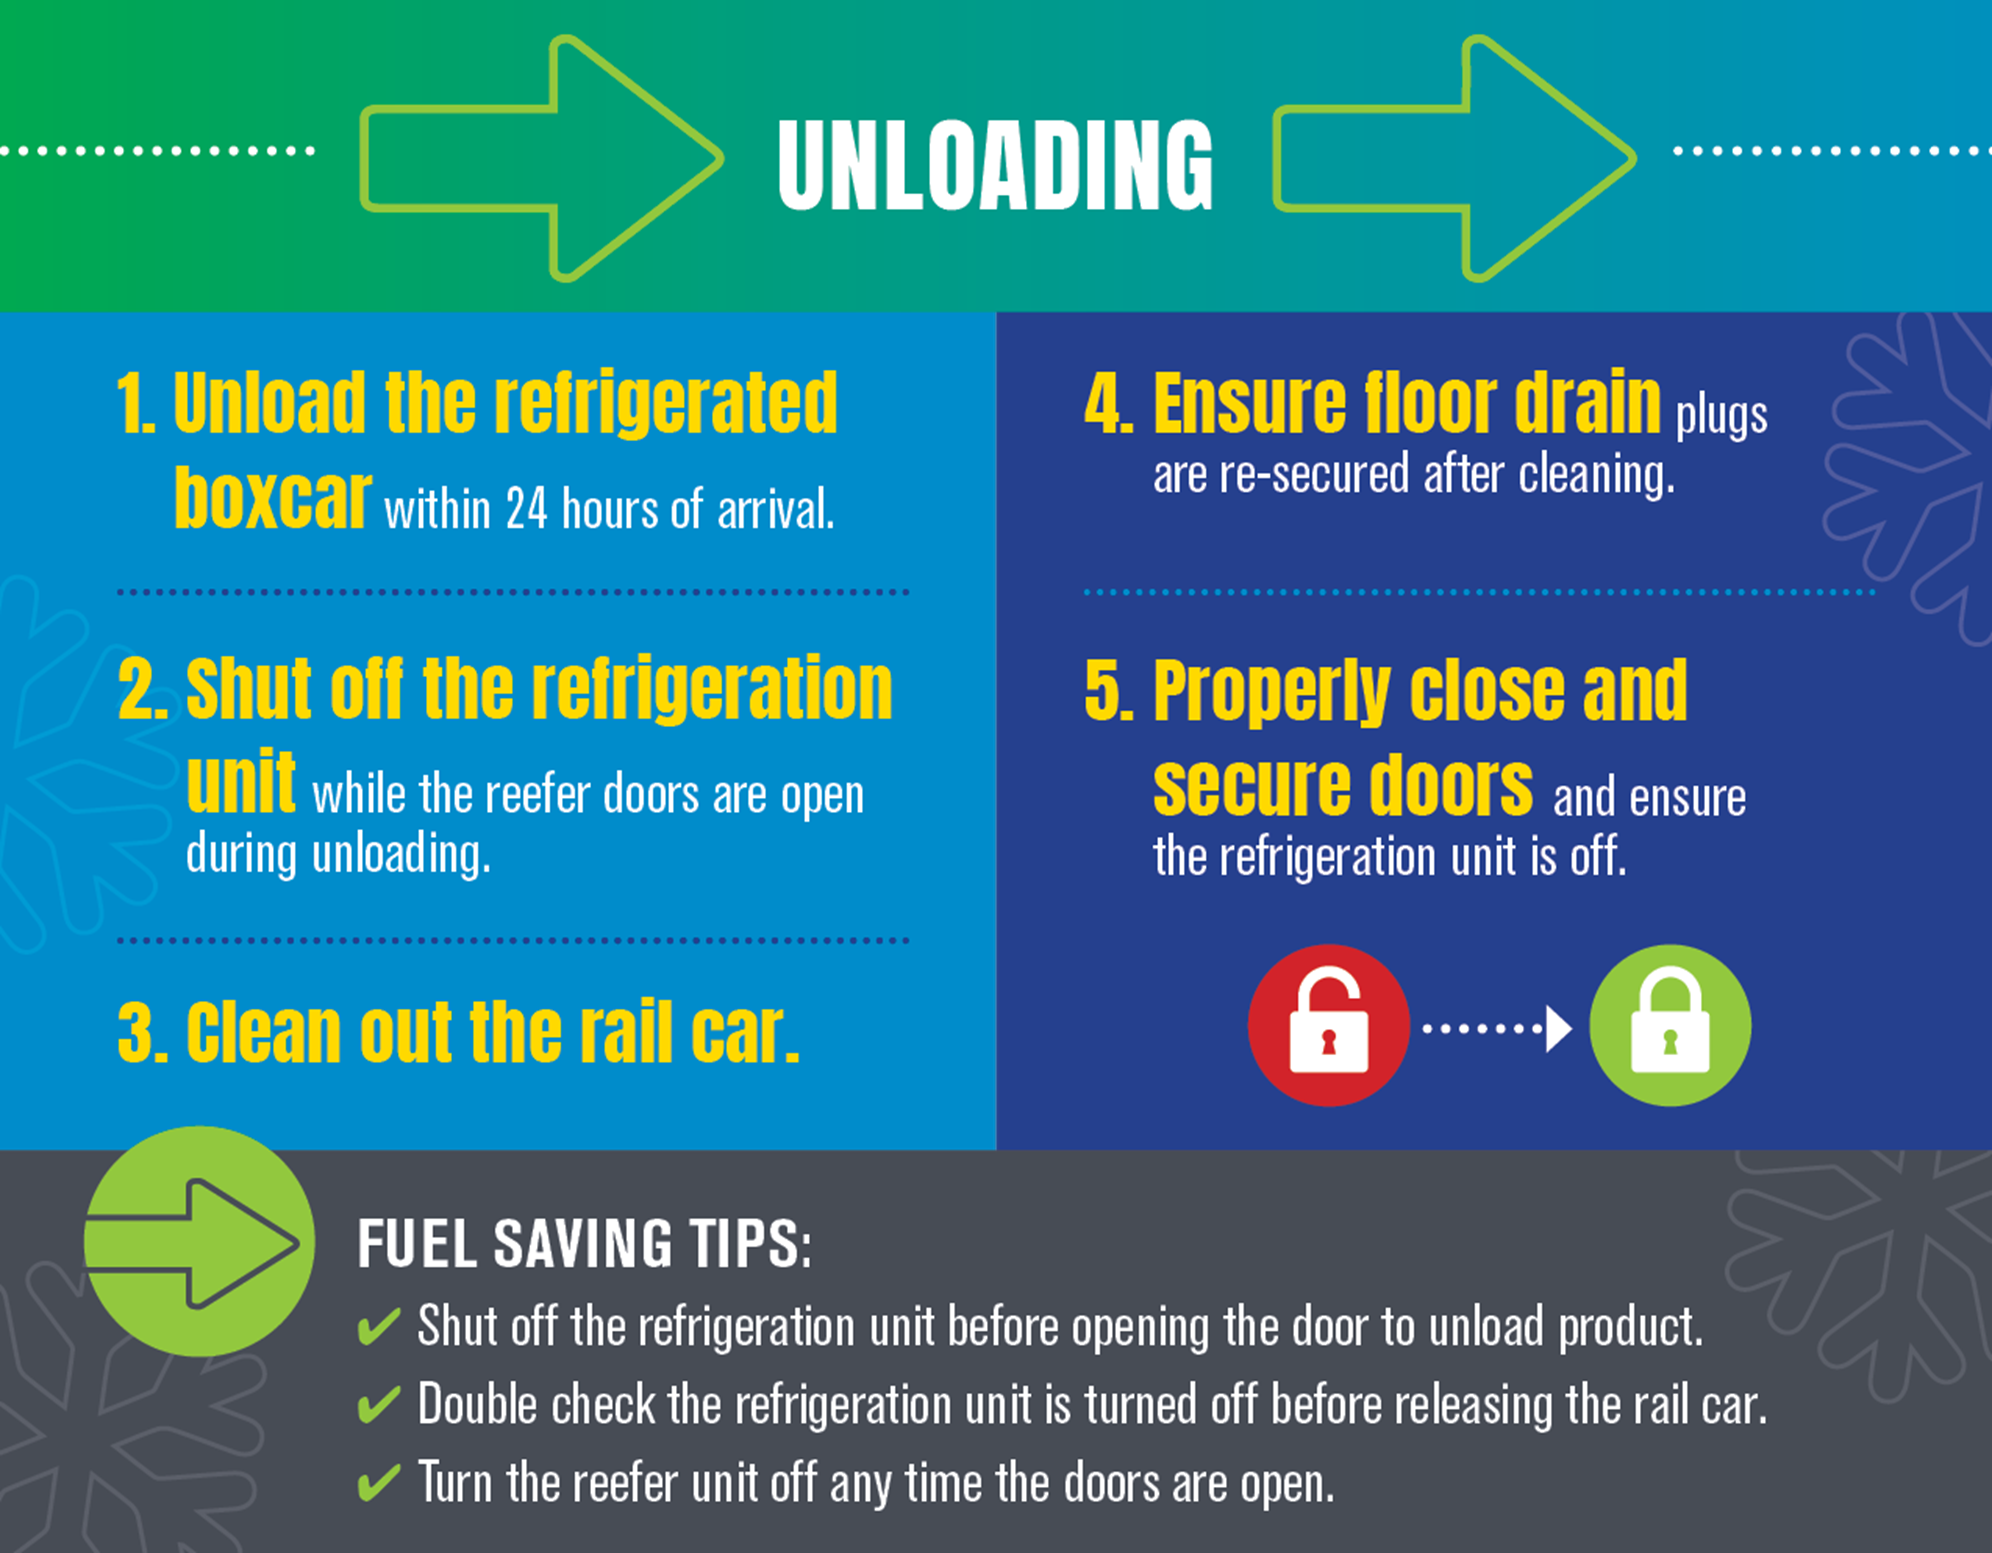 Unloading_Infographic_Reefer Best Practices 080222